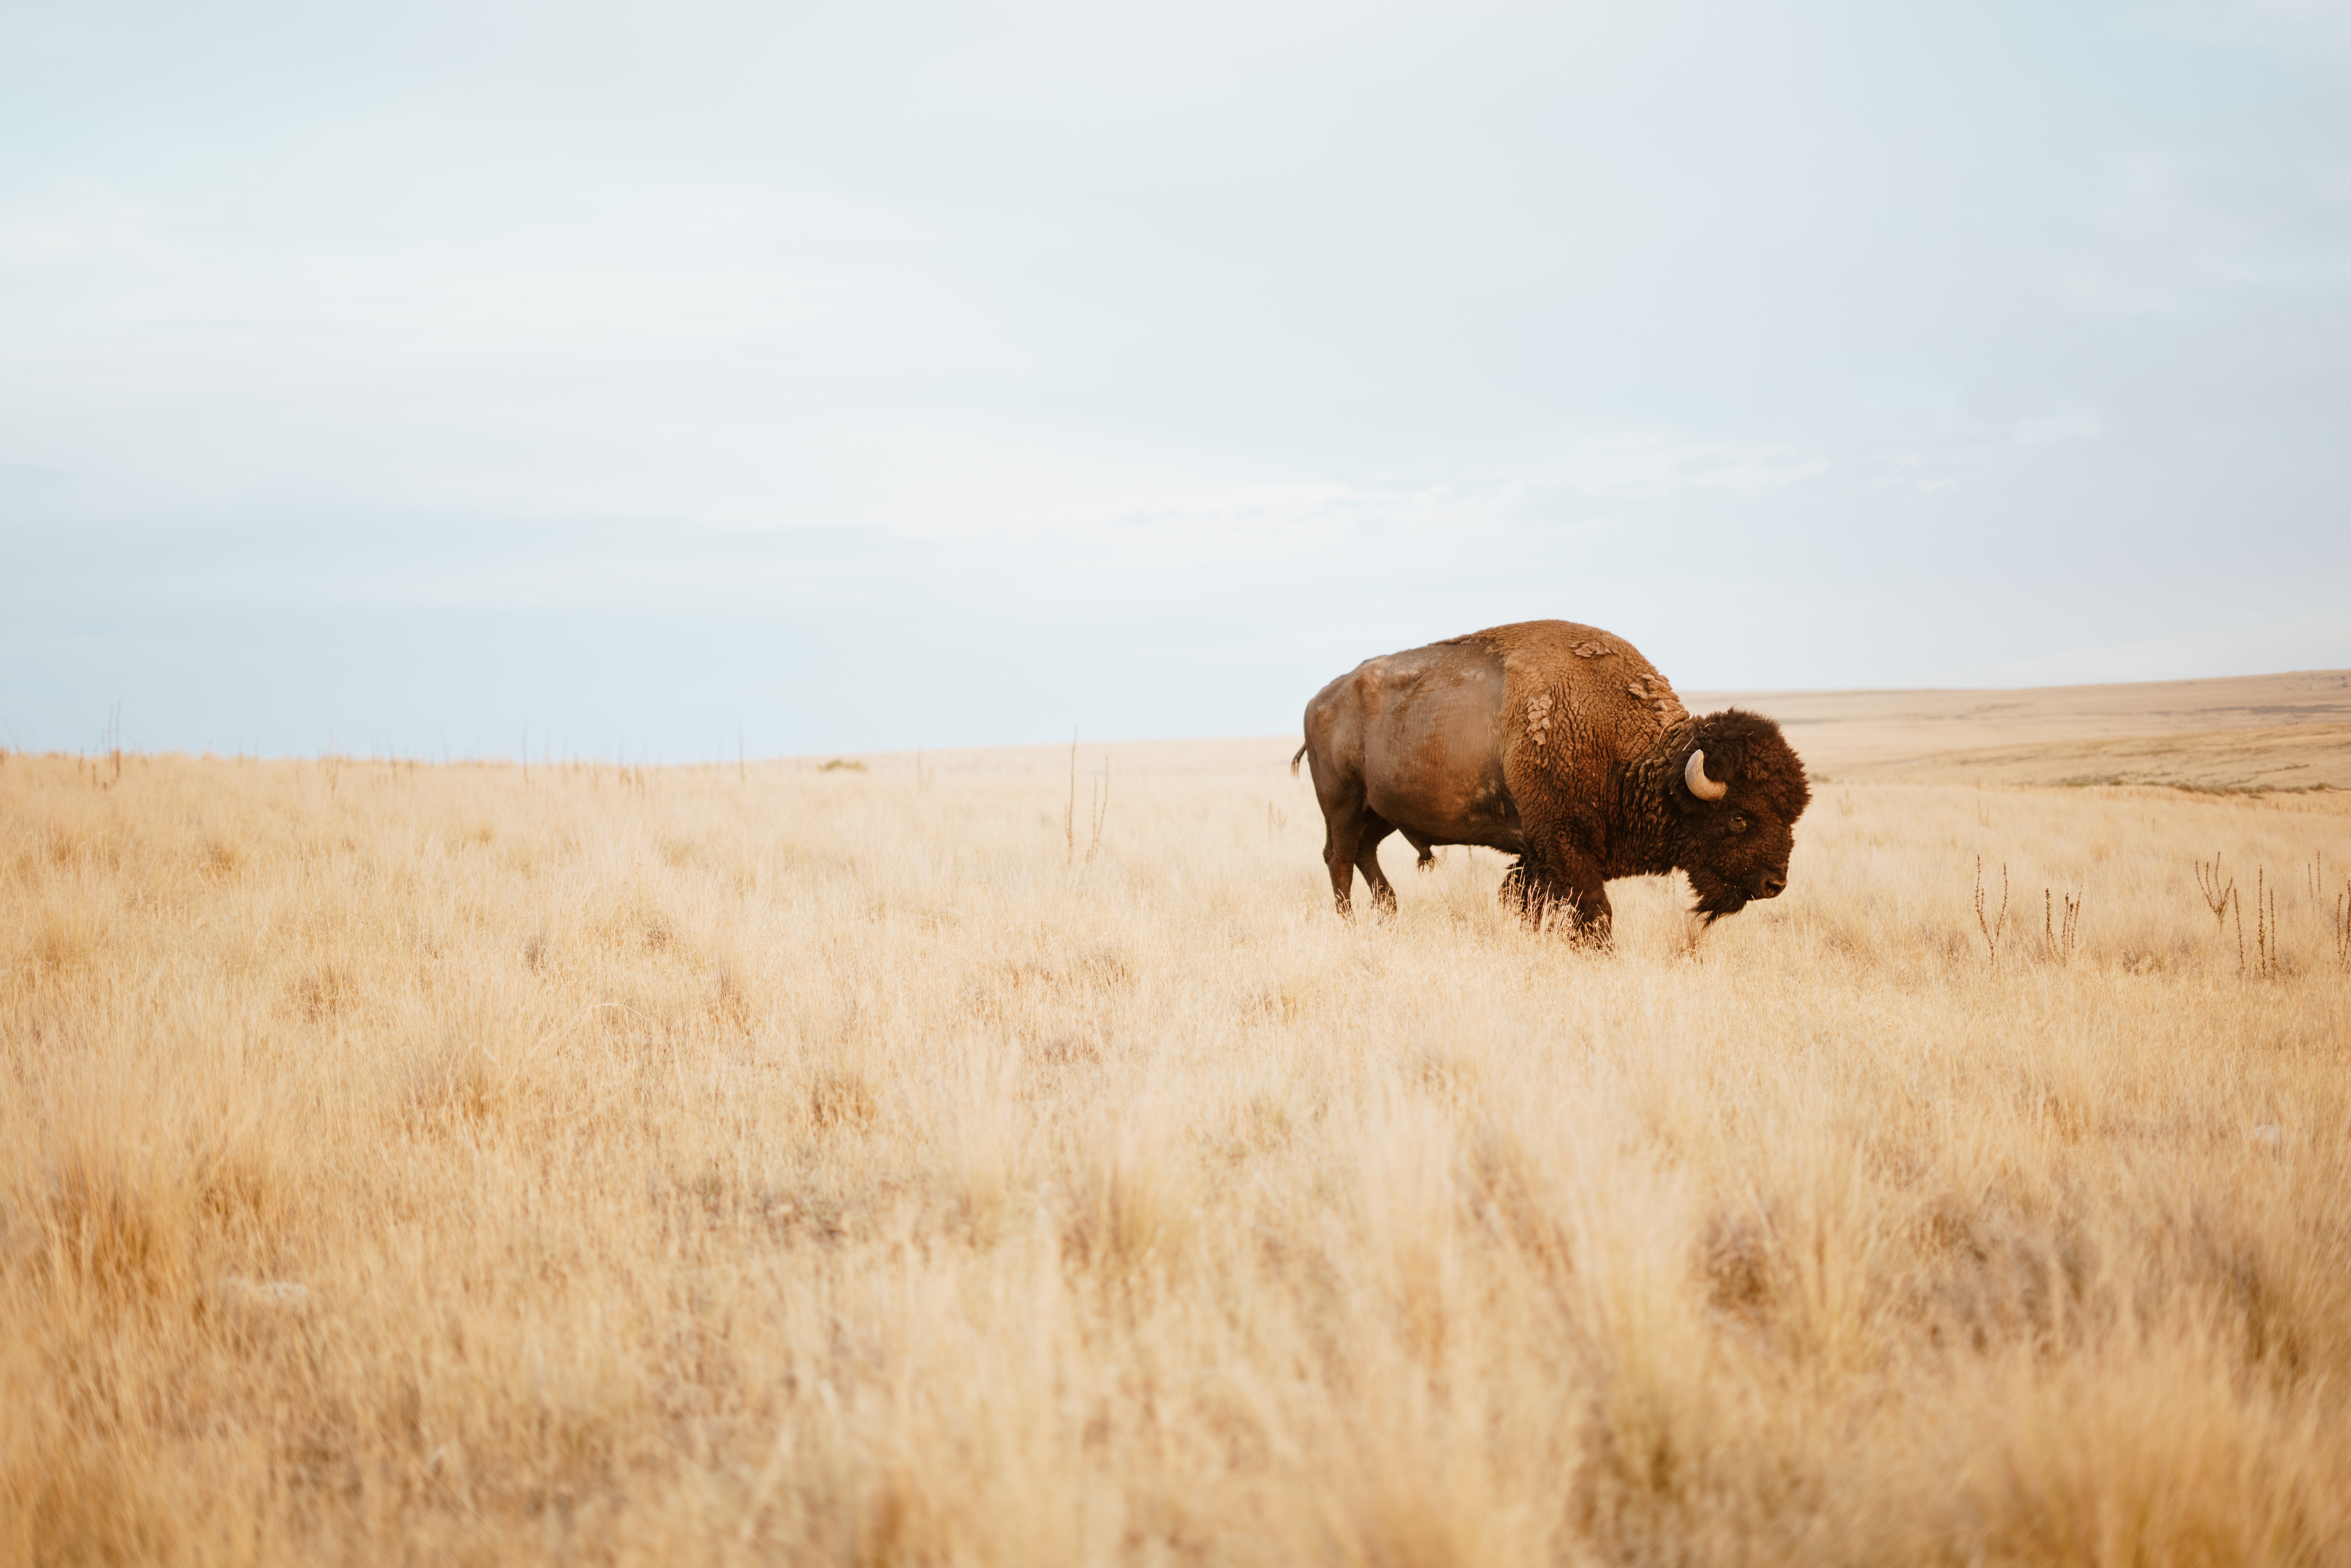 Image of bison in field.